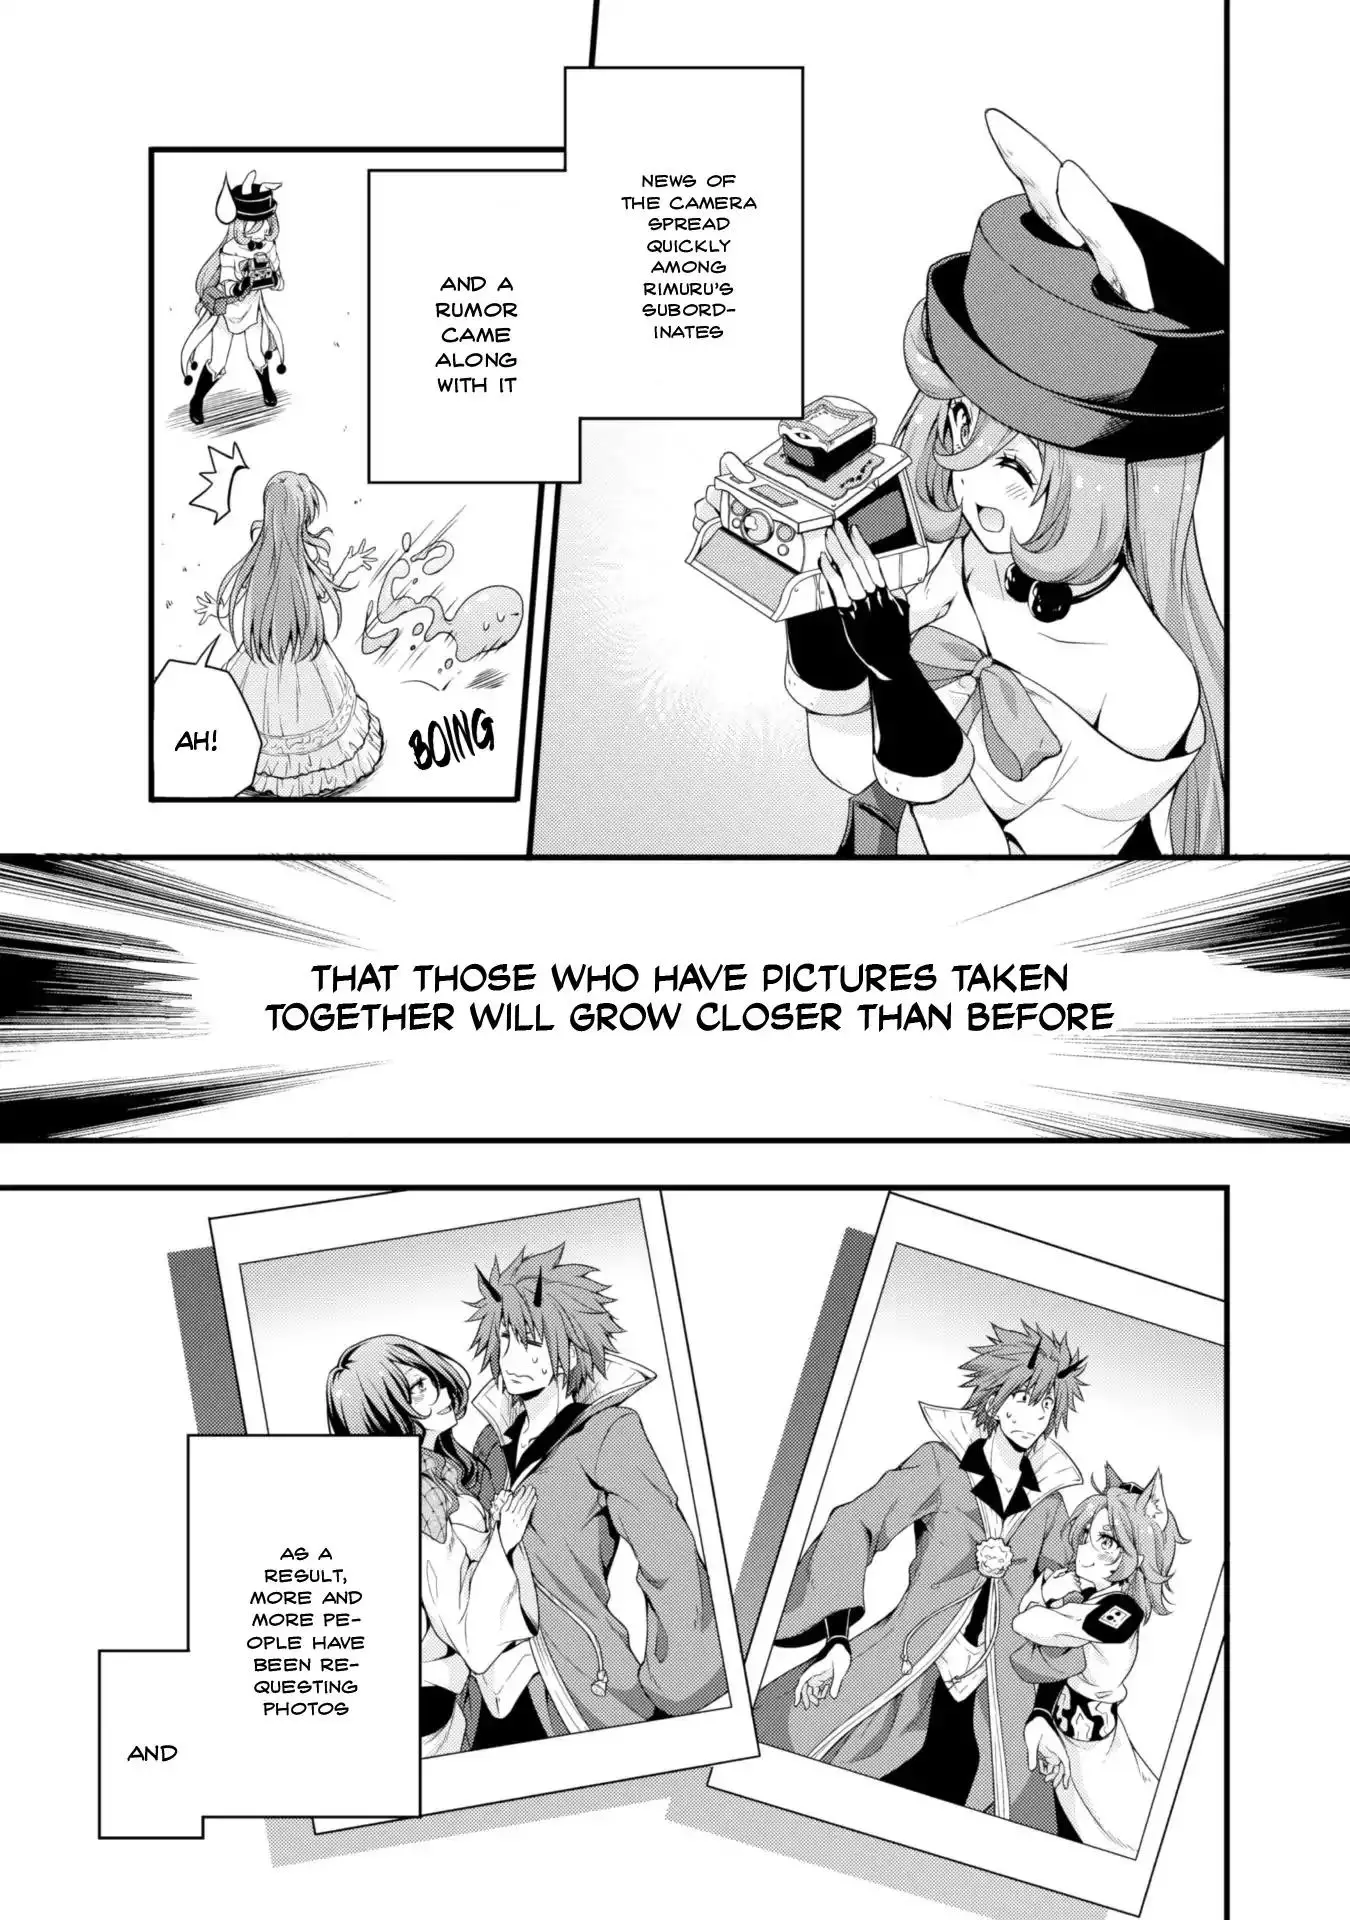 Tensei Shitara Slime Datta Ken: The Ways of Strolling in the Demon Country - 13 page 4